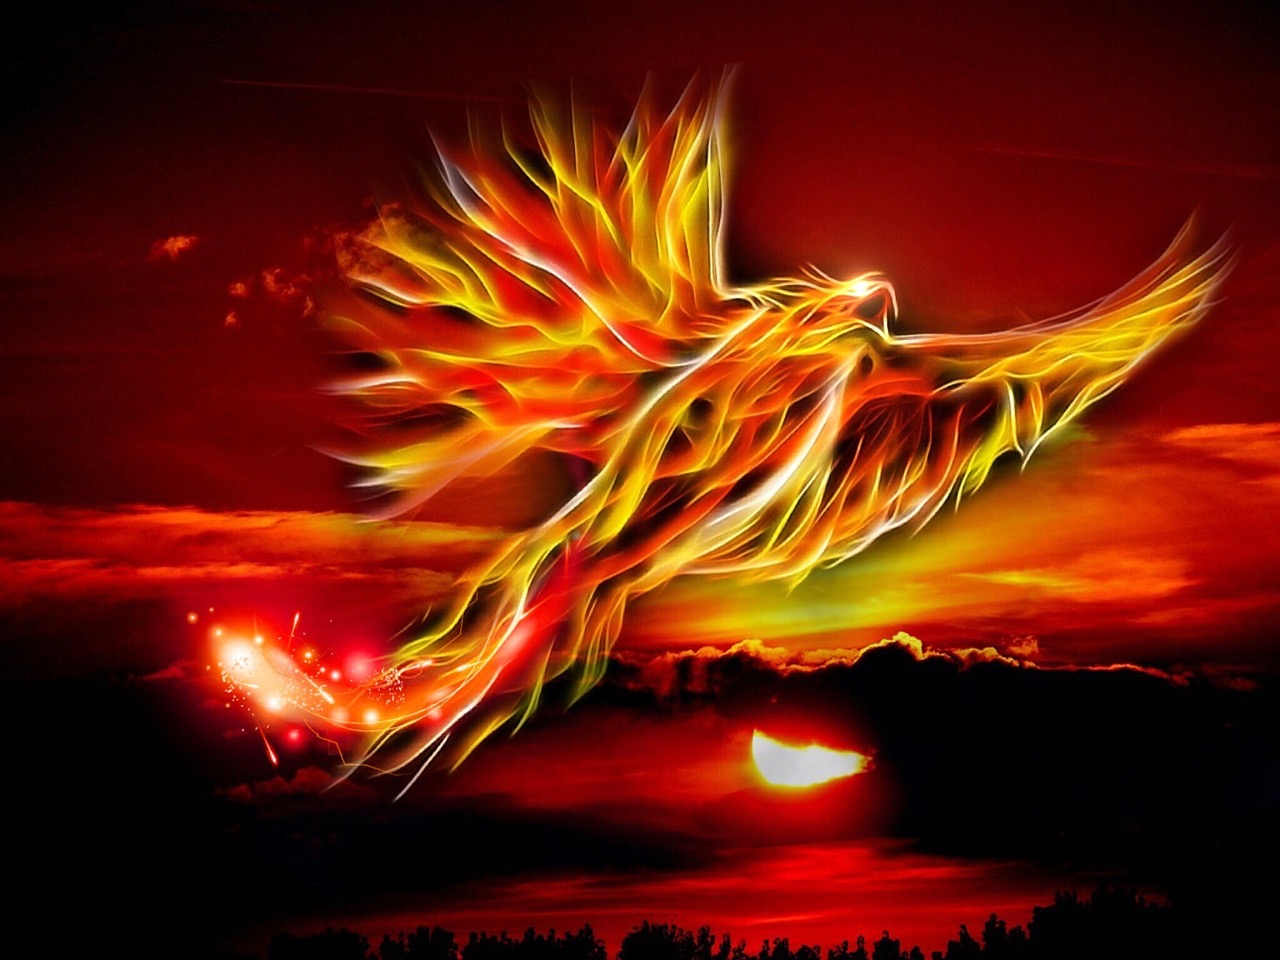 A brilliant Phoenix dressed in red, orange and yellow flames